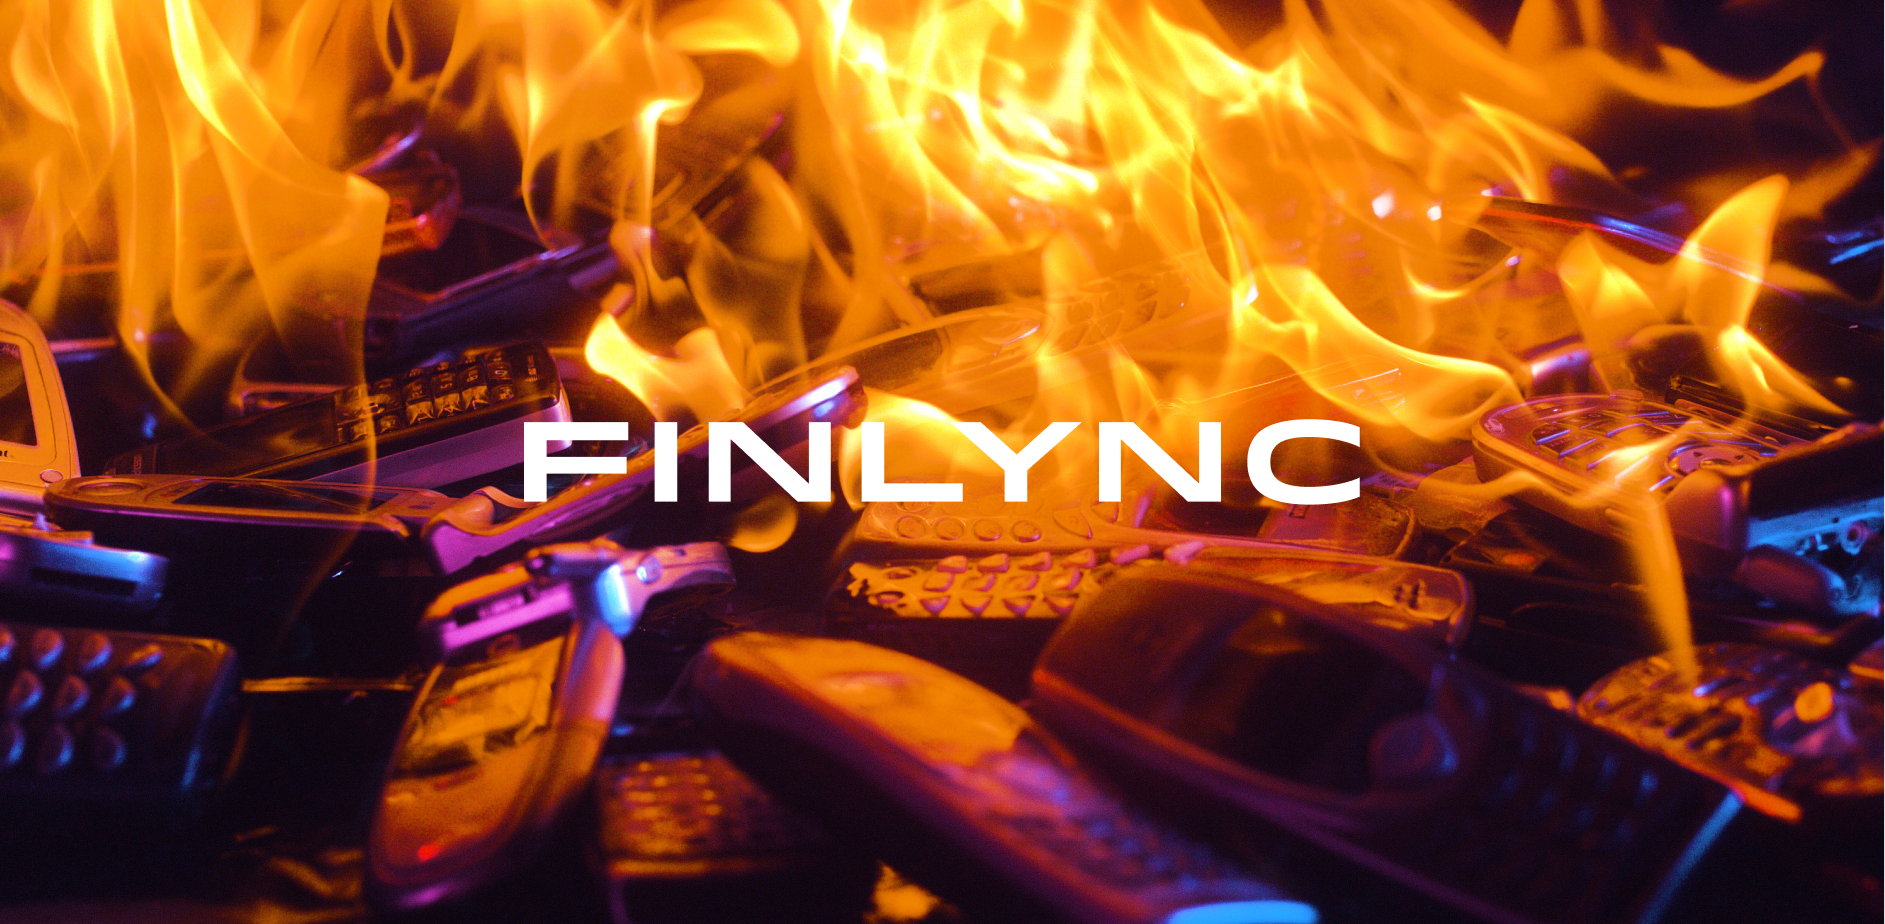 Finlync logo overlaid on image of old cell phones on fire